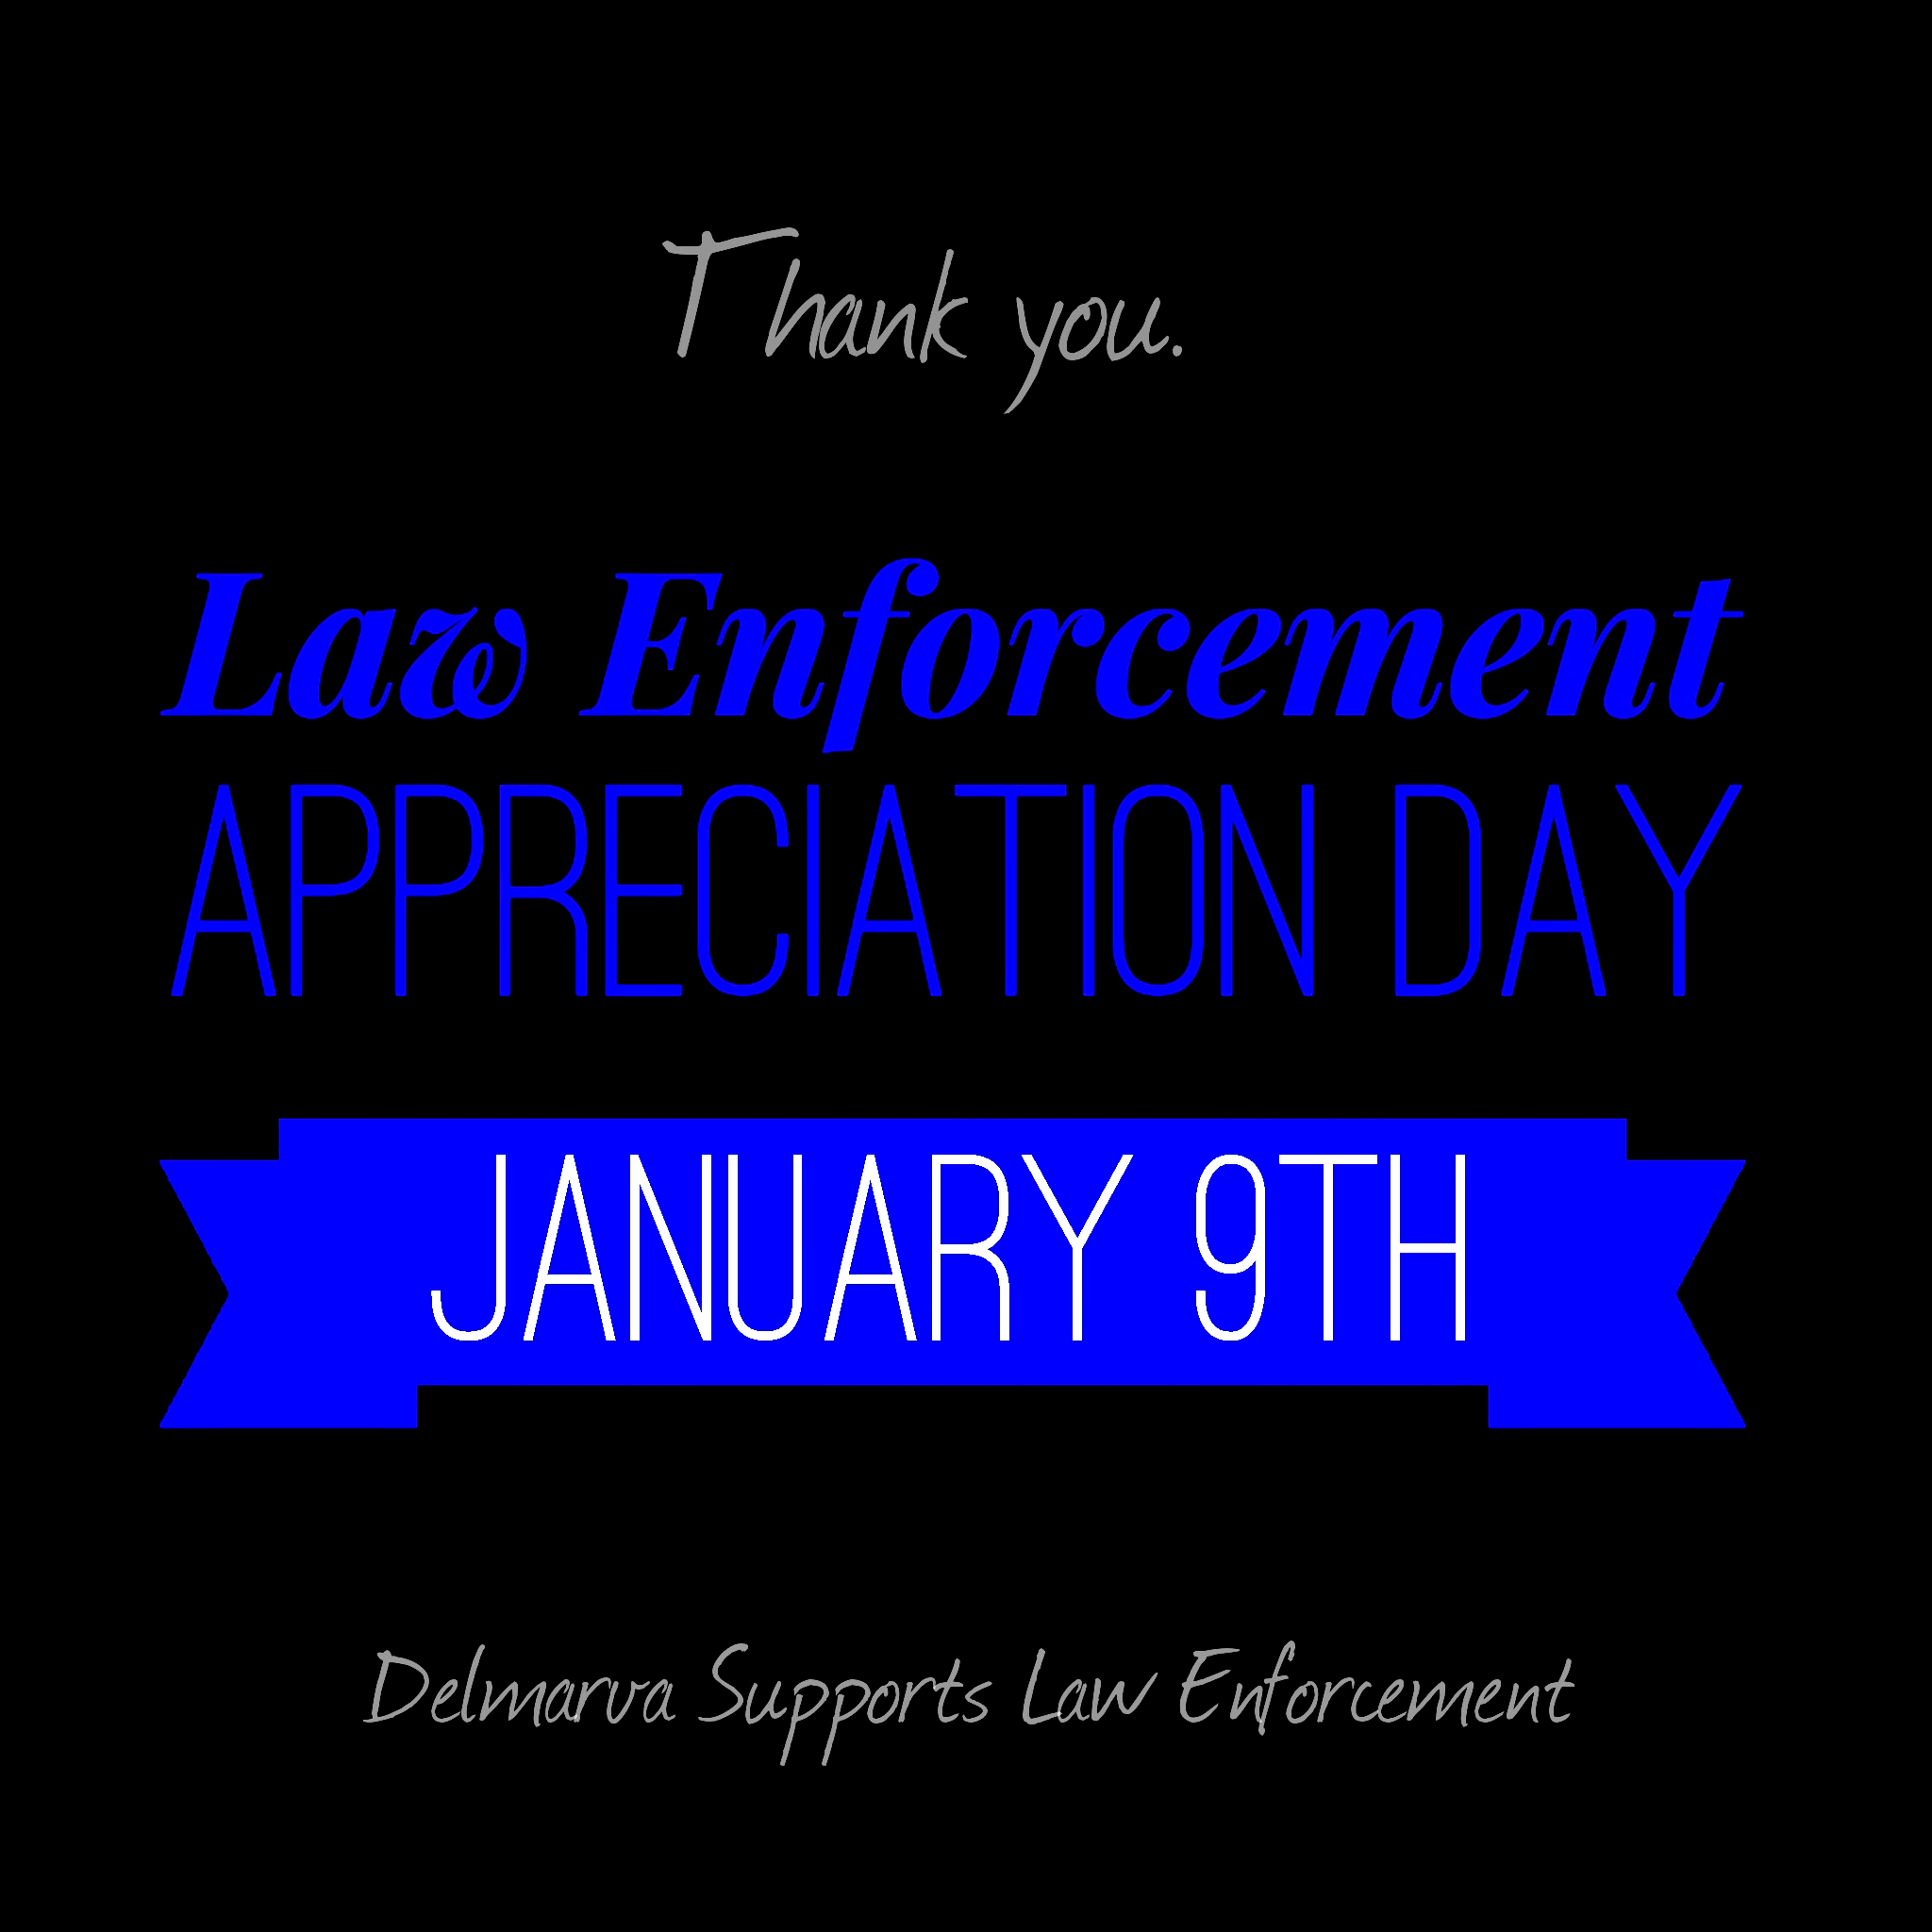 Law Enforcement Appreciation Day, created by C.O.P.S